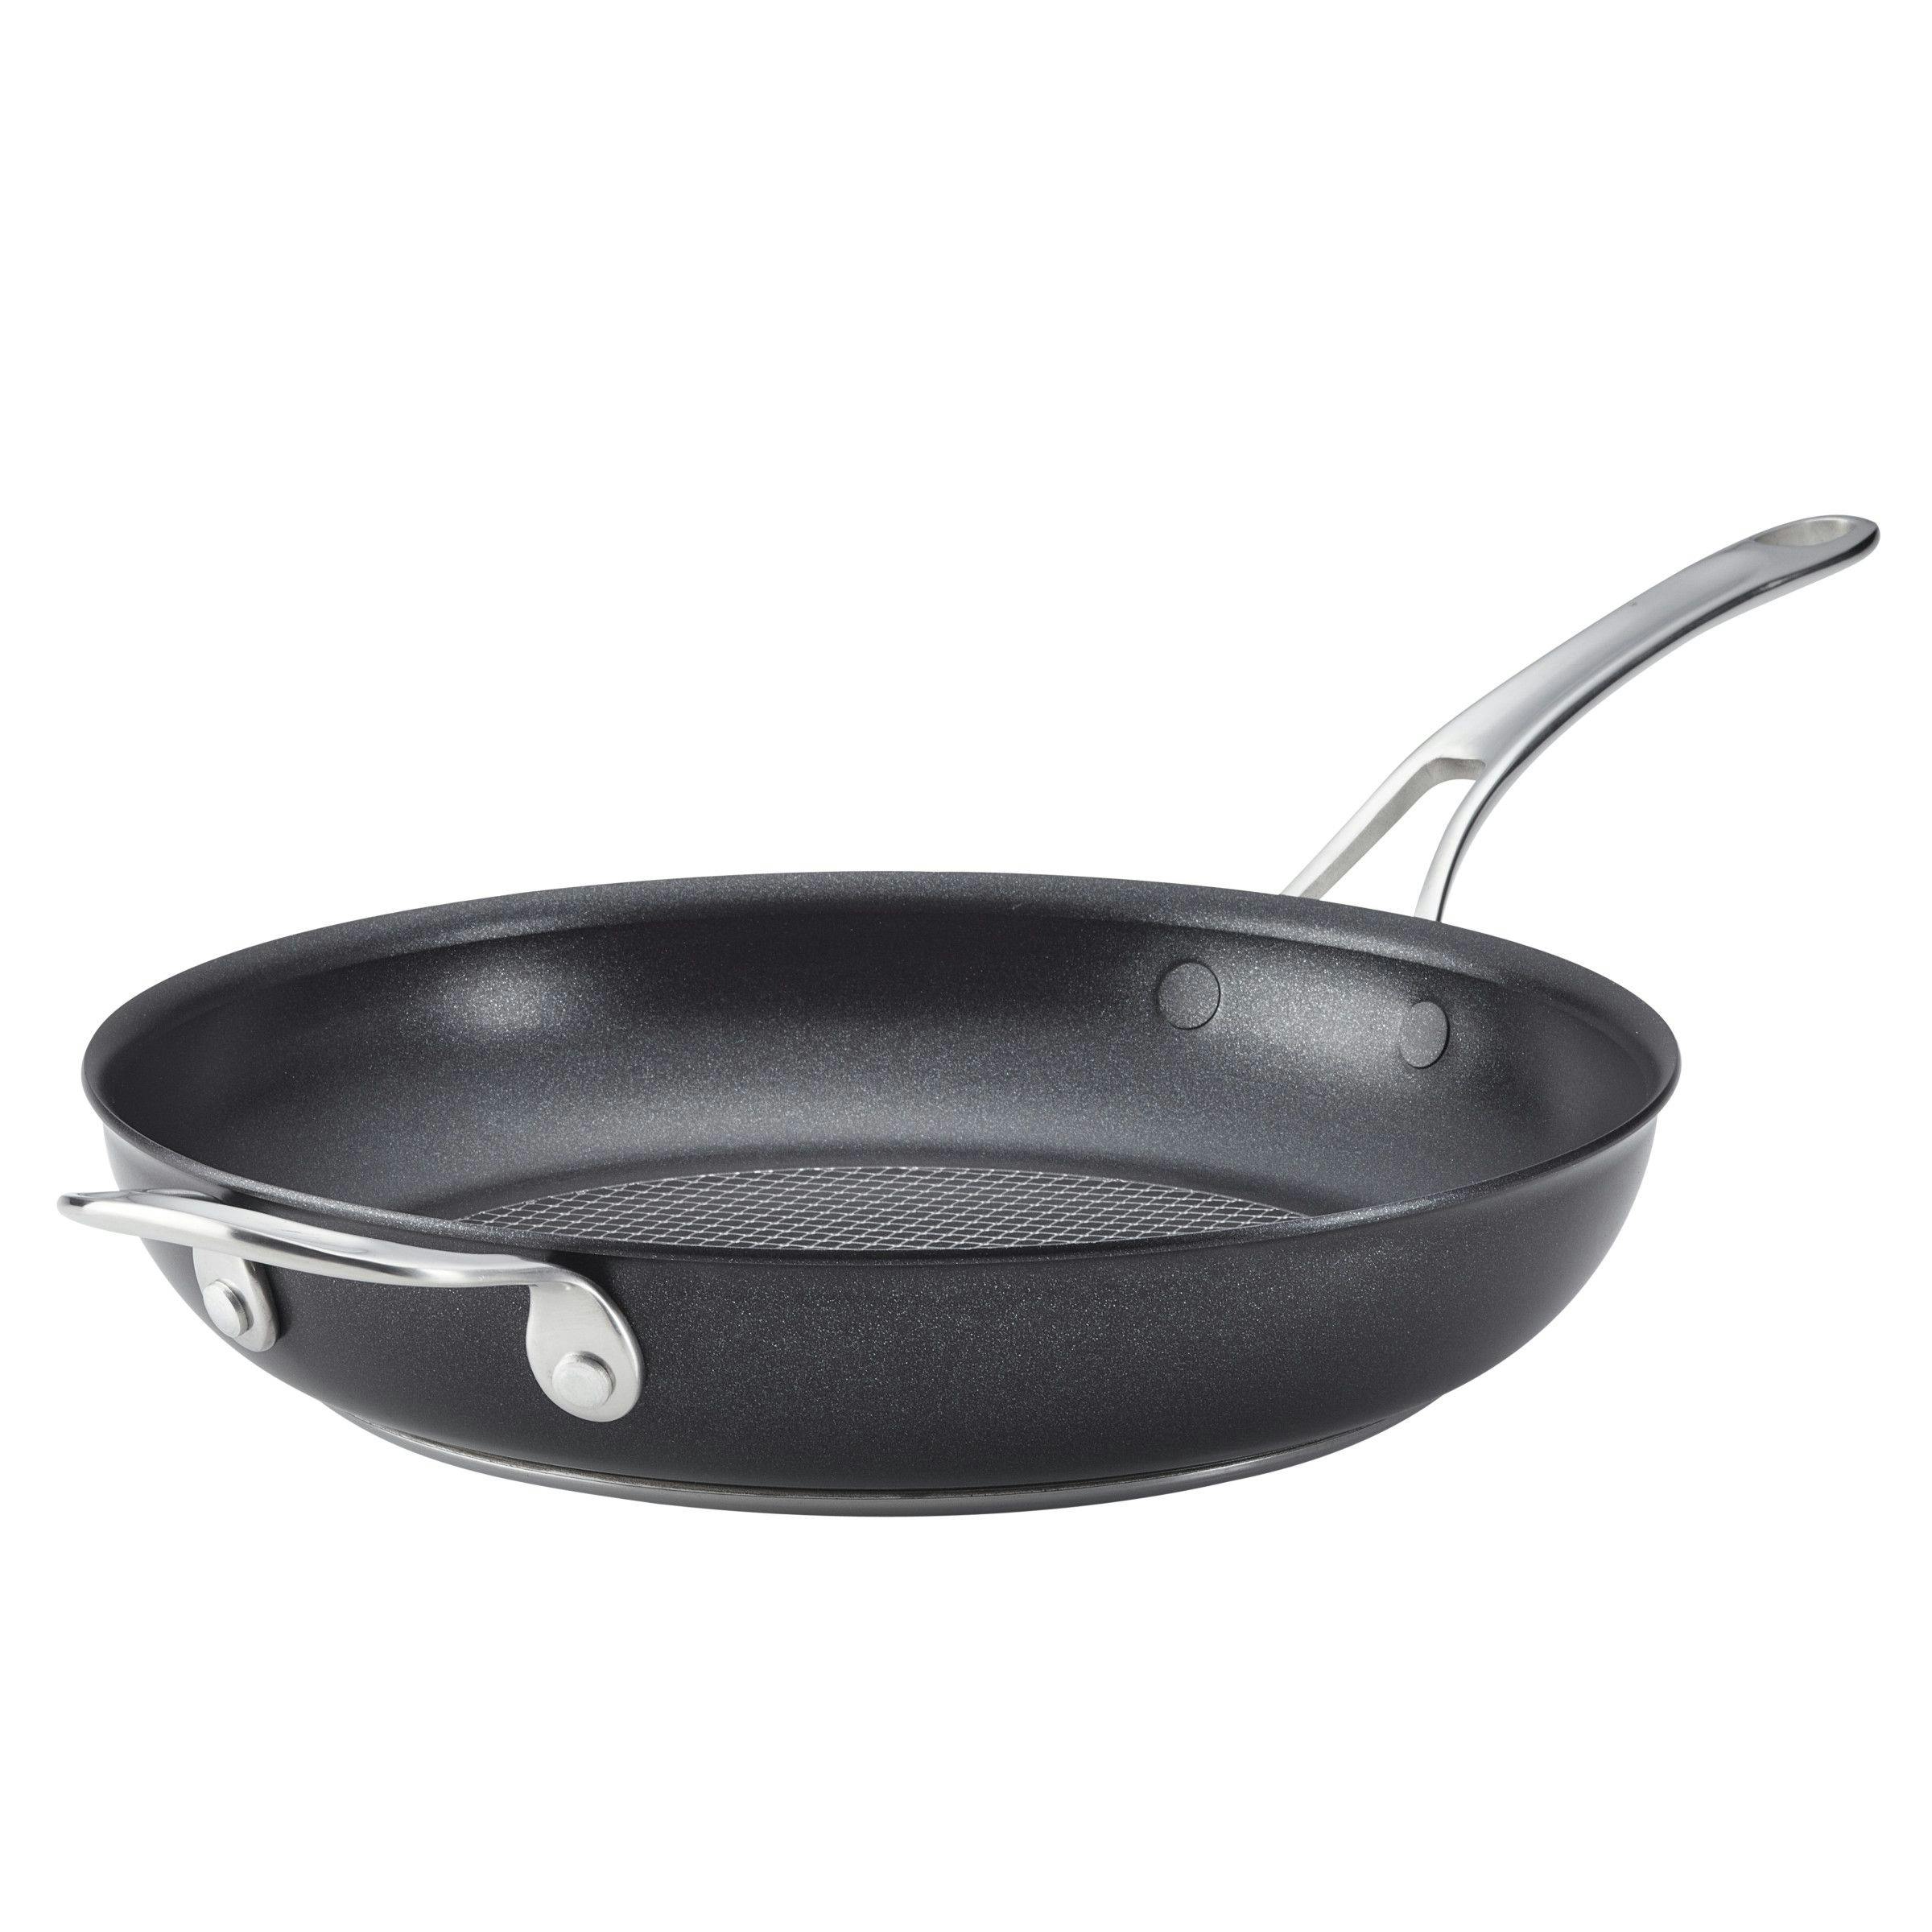 Anolon X Hybrid Nonstick Induction Frying Pan With Helper Handle, 12-Inch, Super Dark Gray